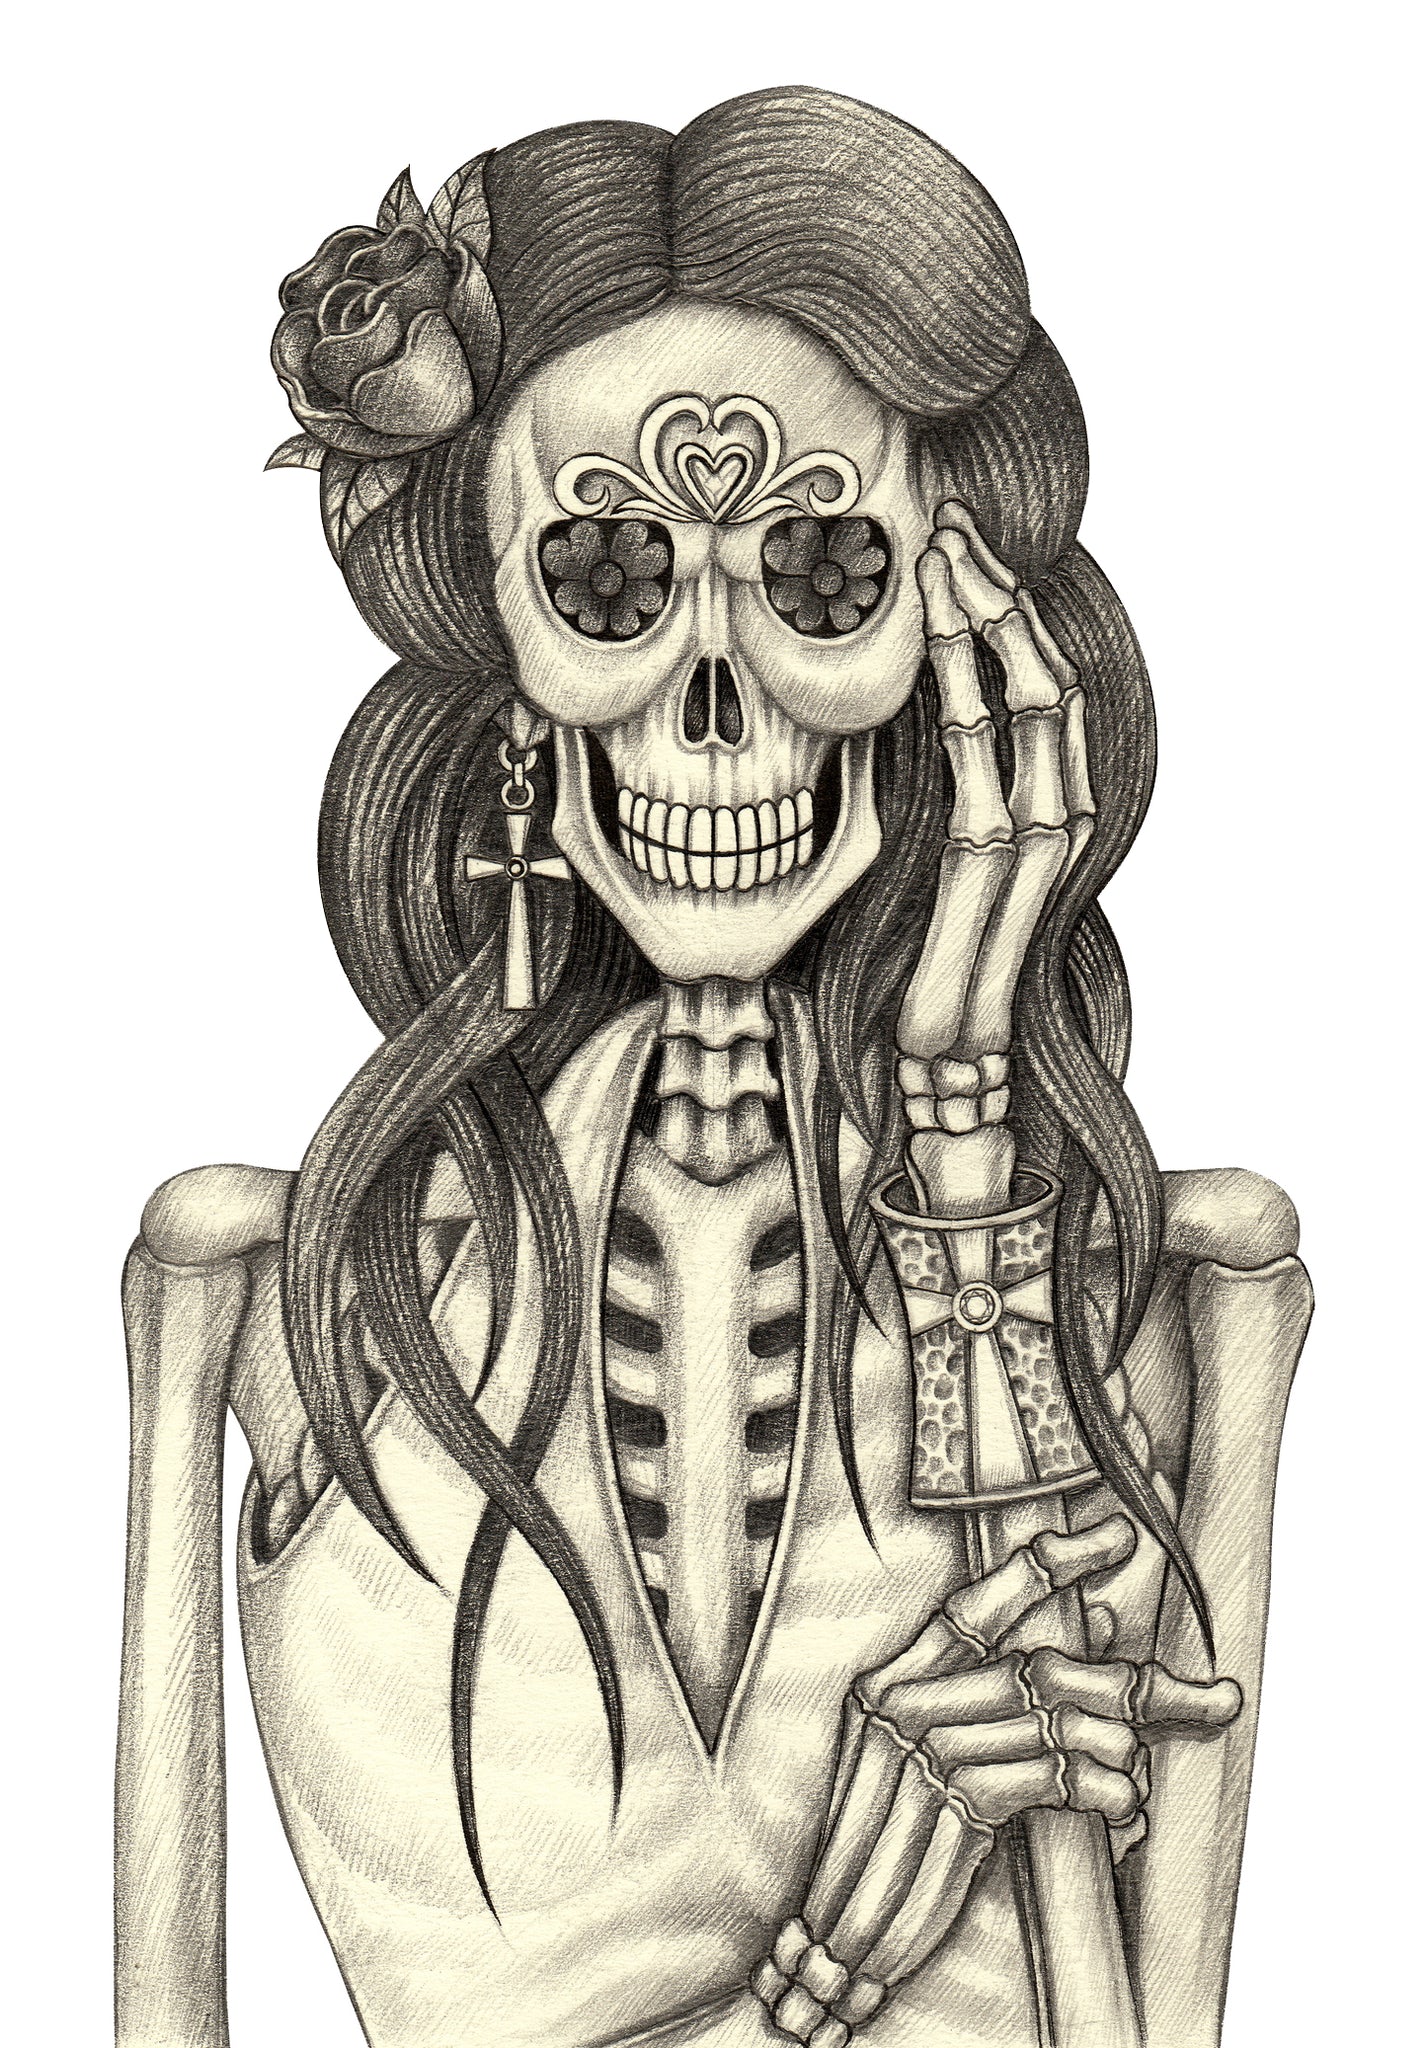 Pencil Sketch Woman Skeleton with Jewelry and Flowers #3 Vinyl Decal Sticker